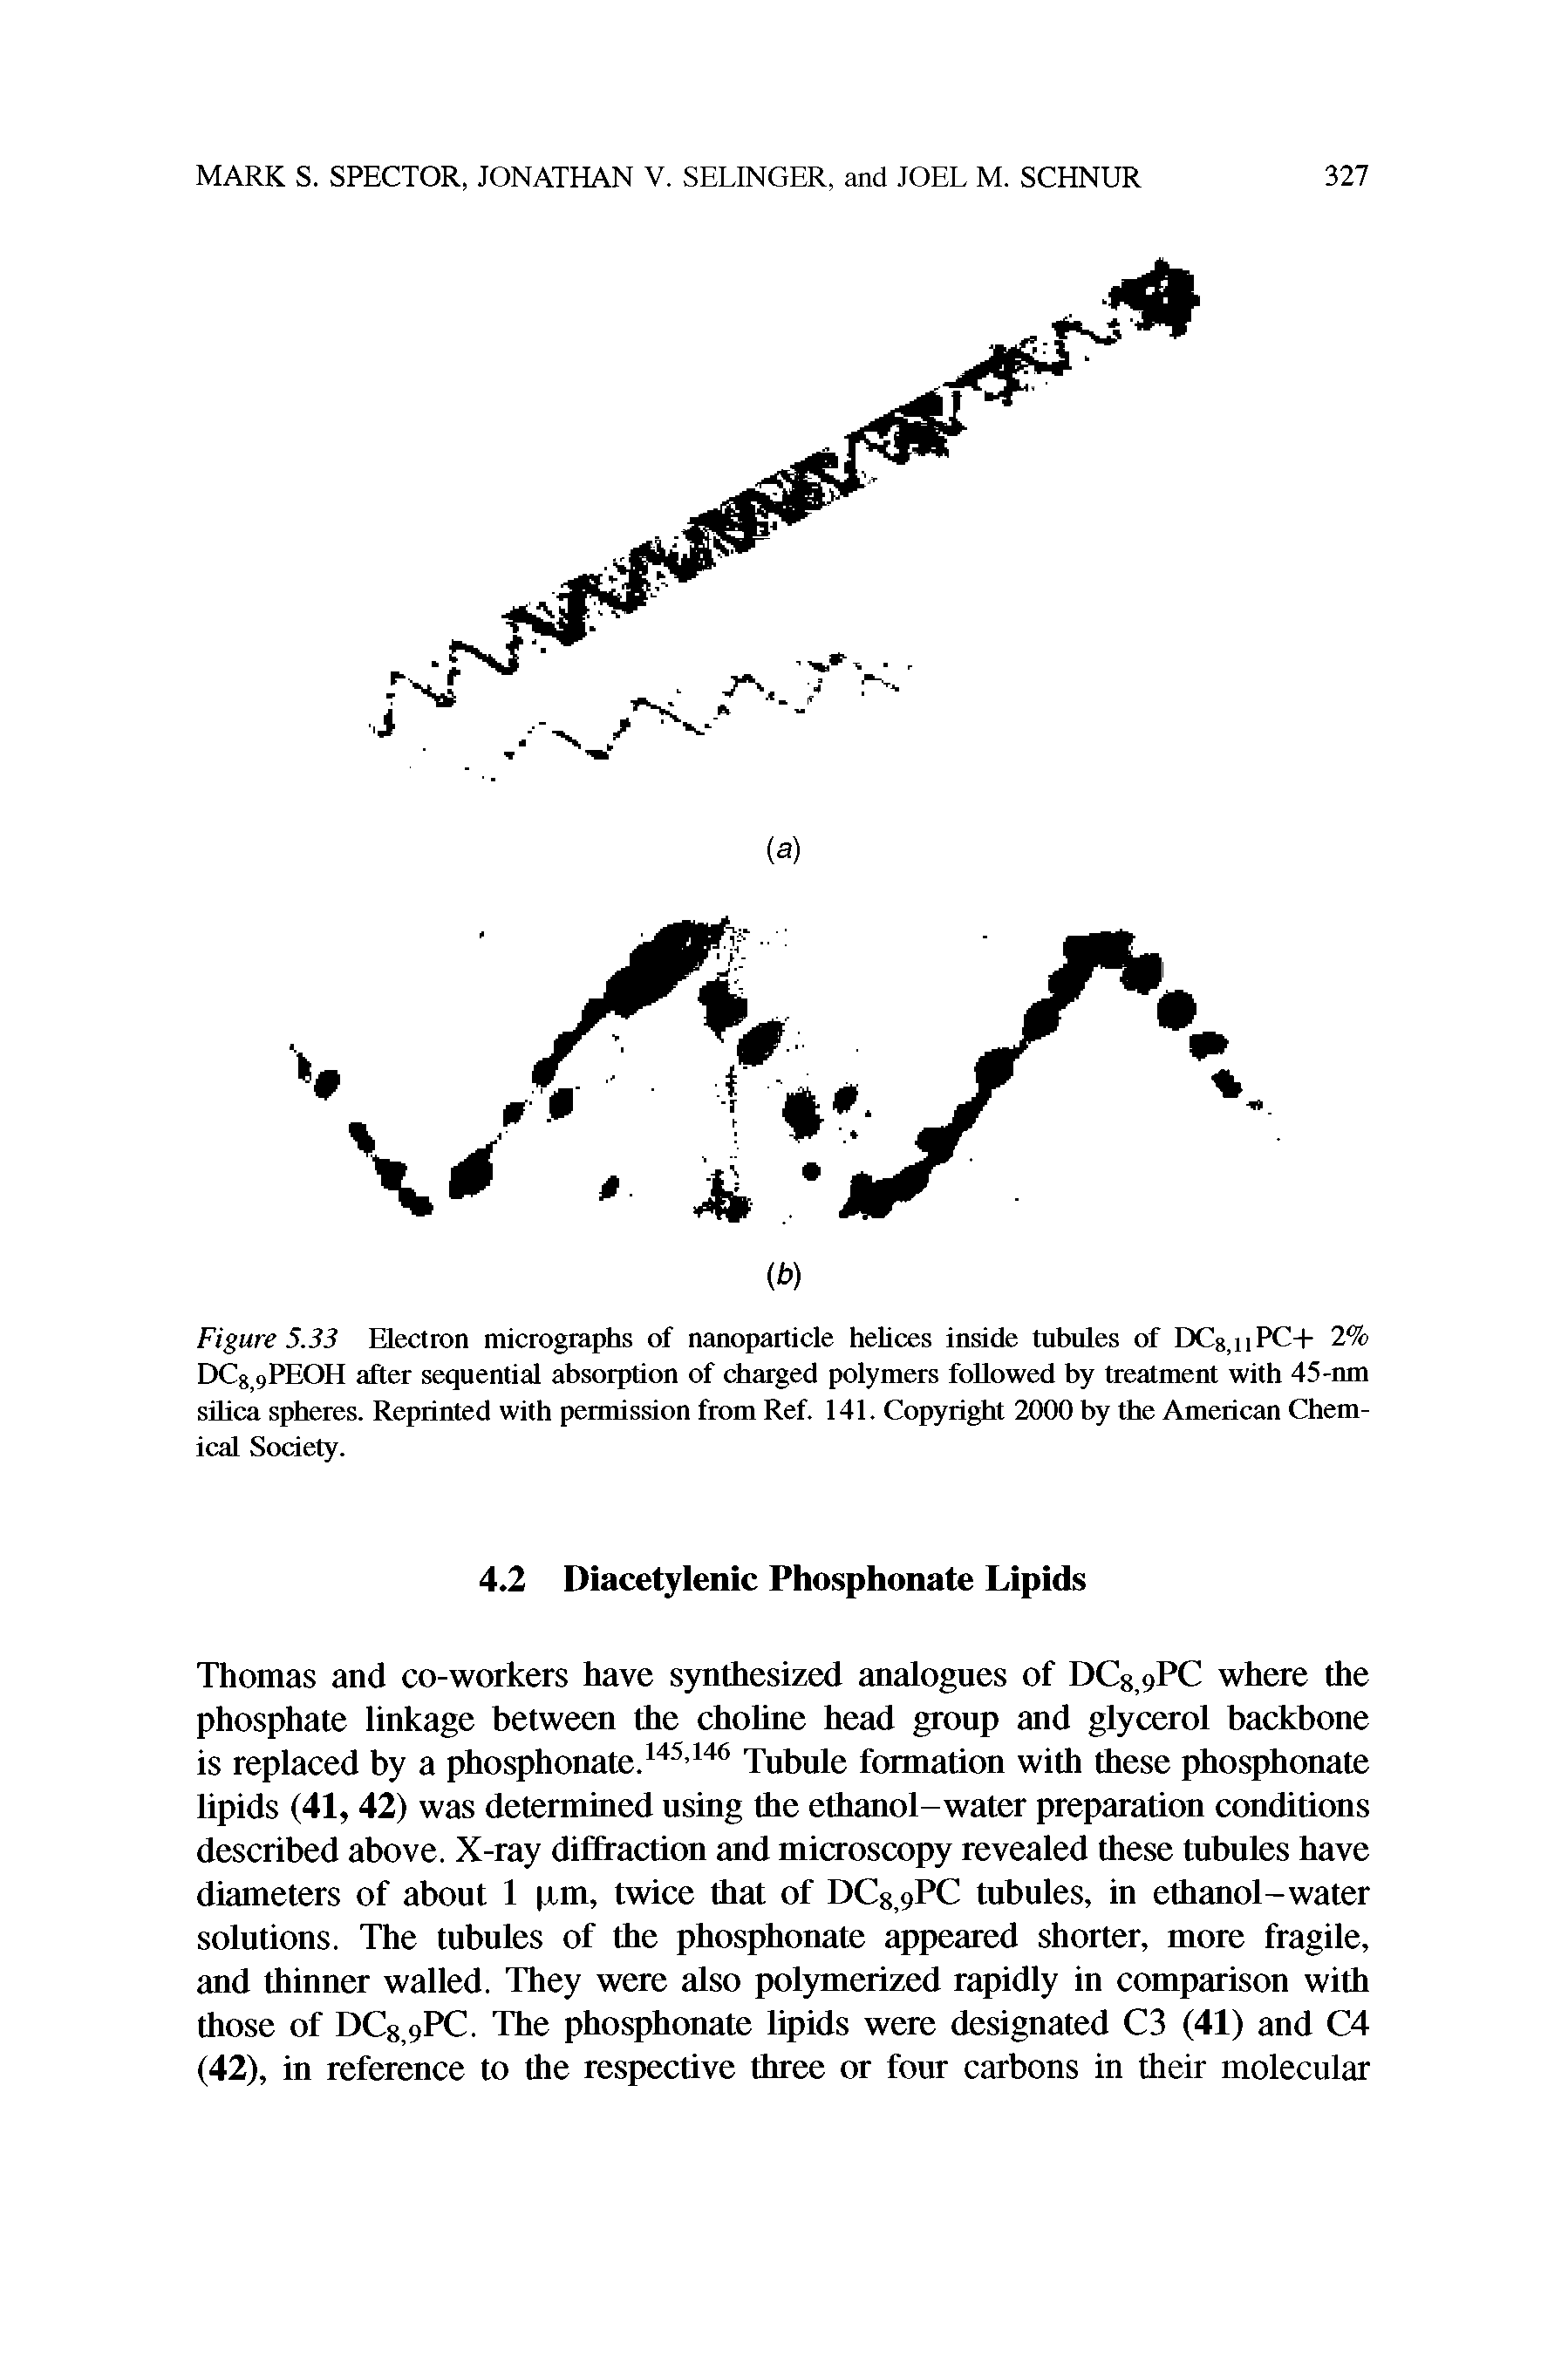 Figure 5.33 Electron micrographs of nanoparticle helices inside tubules of DC8,nPC+ 2% DCgj9PEOH after sequential absorption of charged polymers followed by treatment with 45-nm silica spheres. Reprinted with permission from Ref. 141. Copyright 2000 by the American Chemical Society.